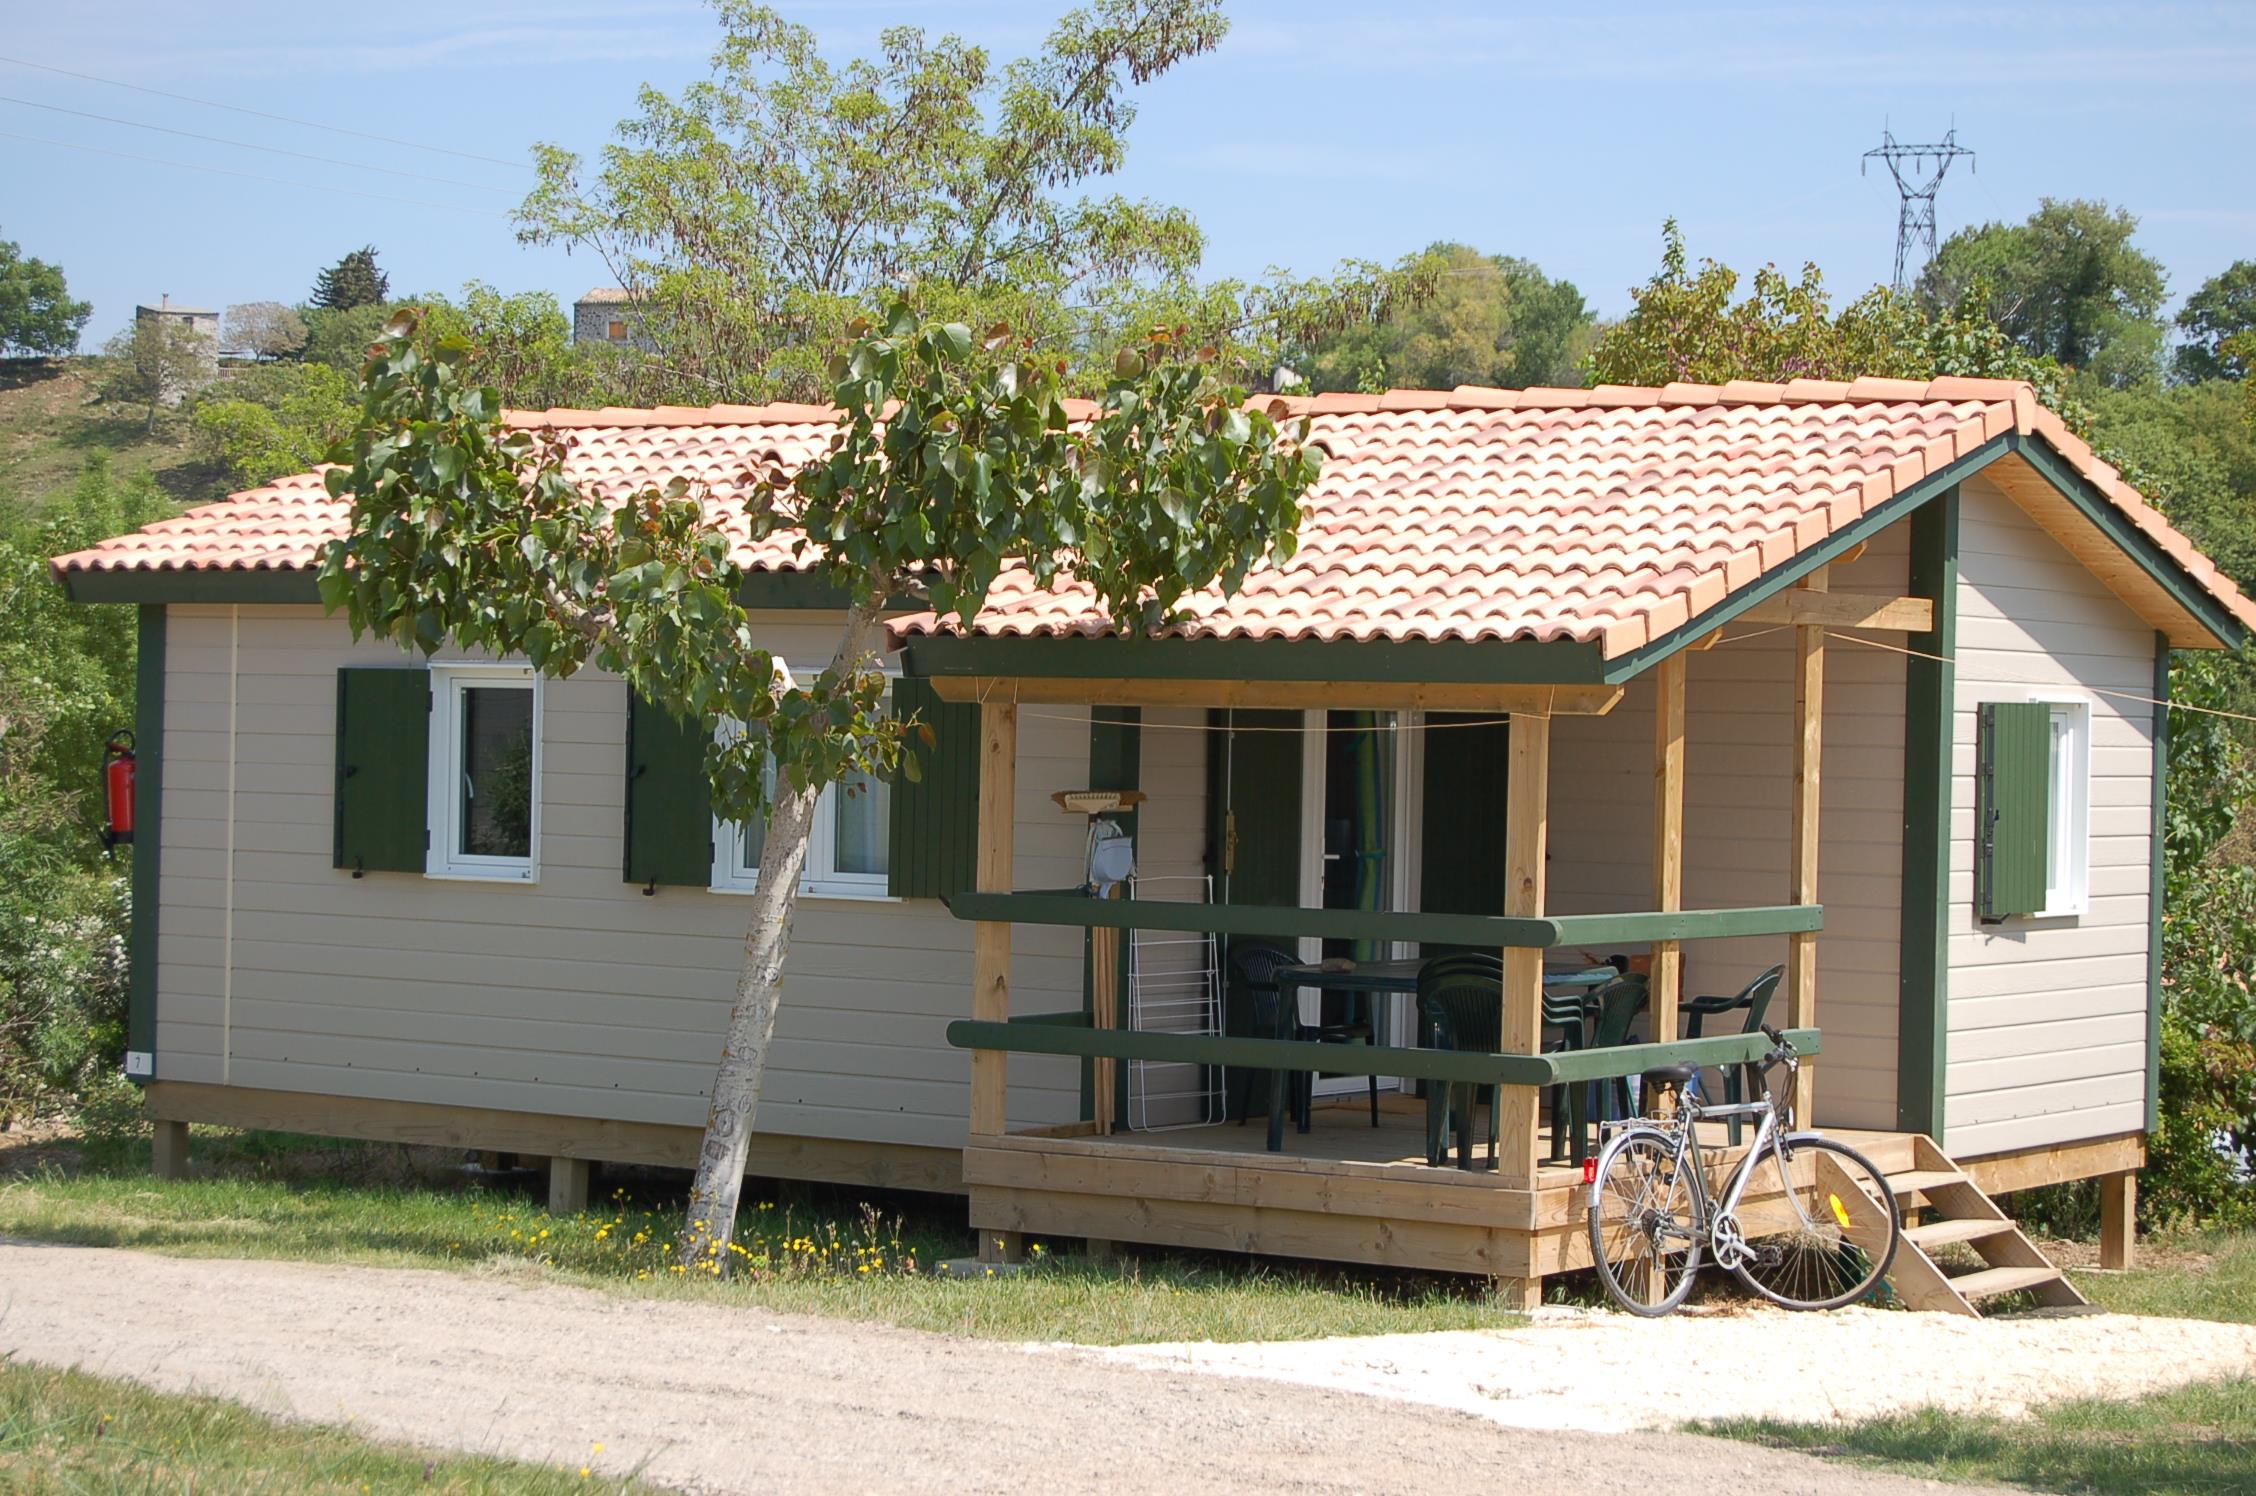 Huuraccommodatie - Chalet Edelweiss - Camping Les Arches